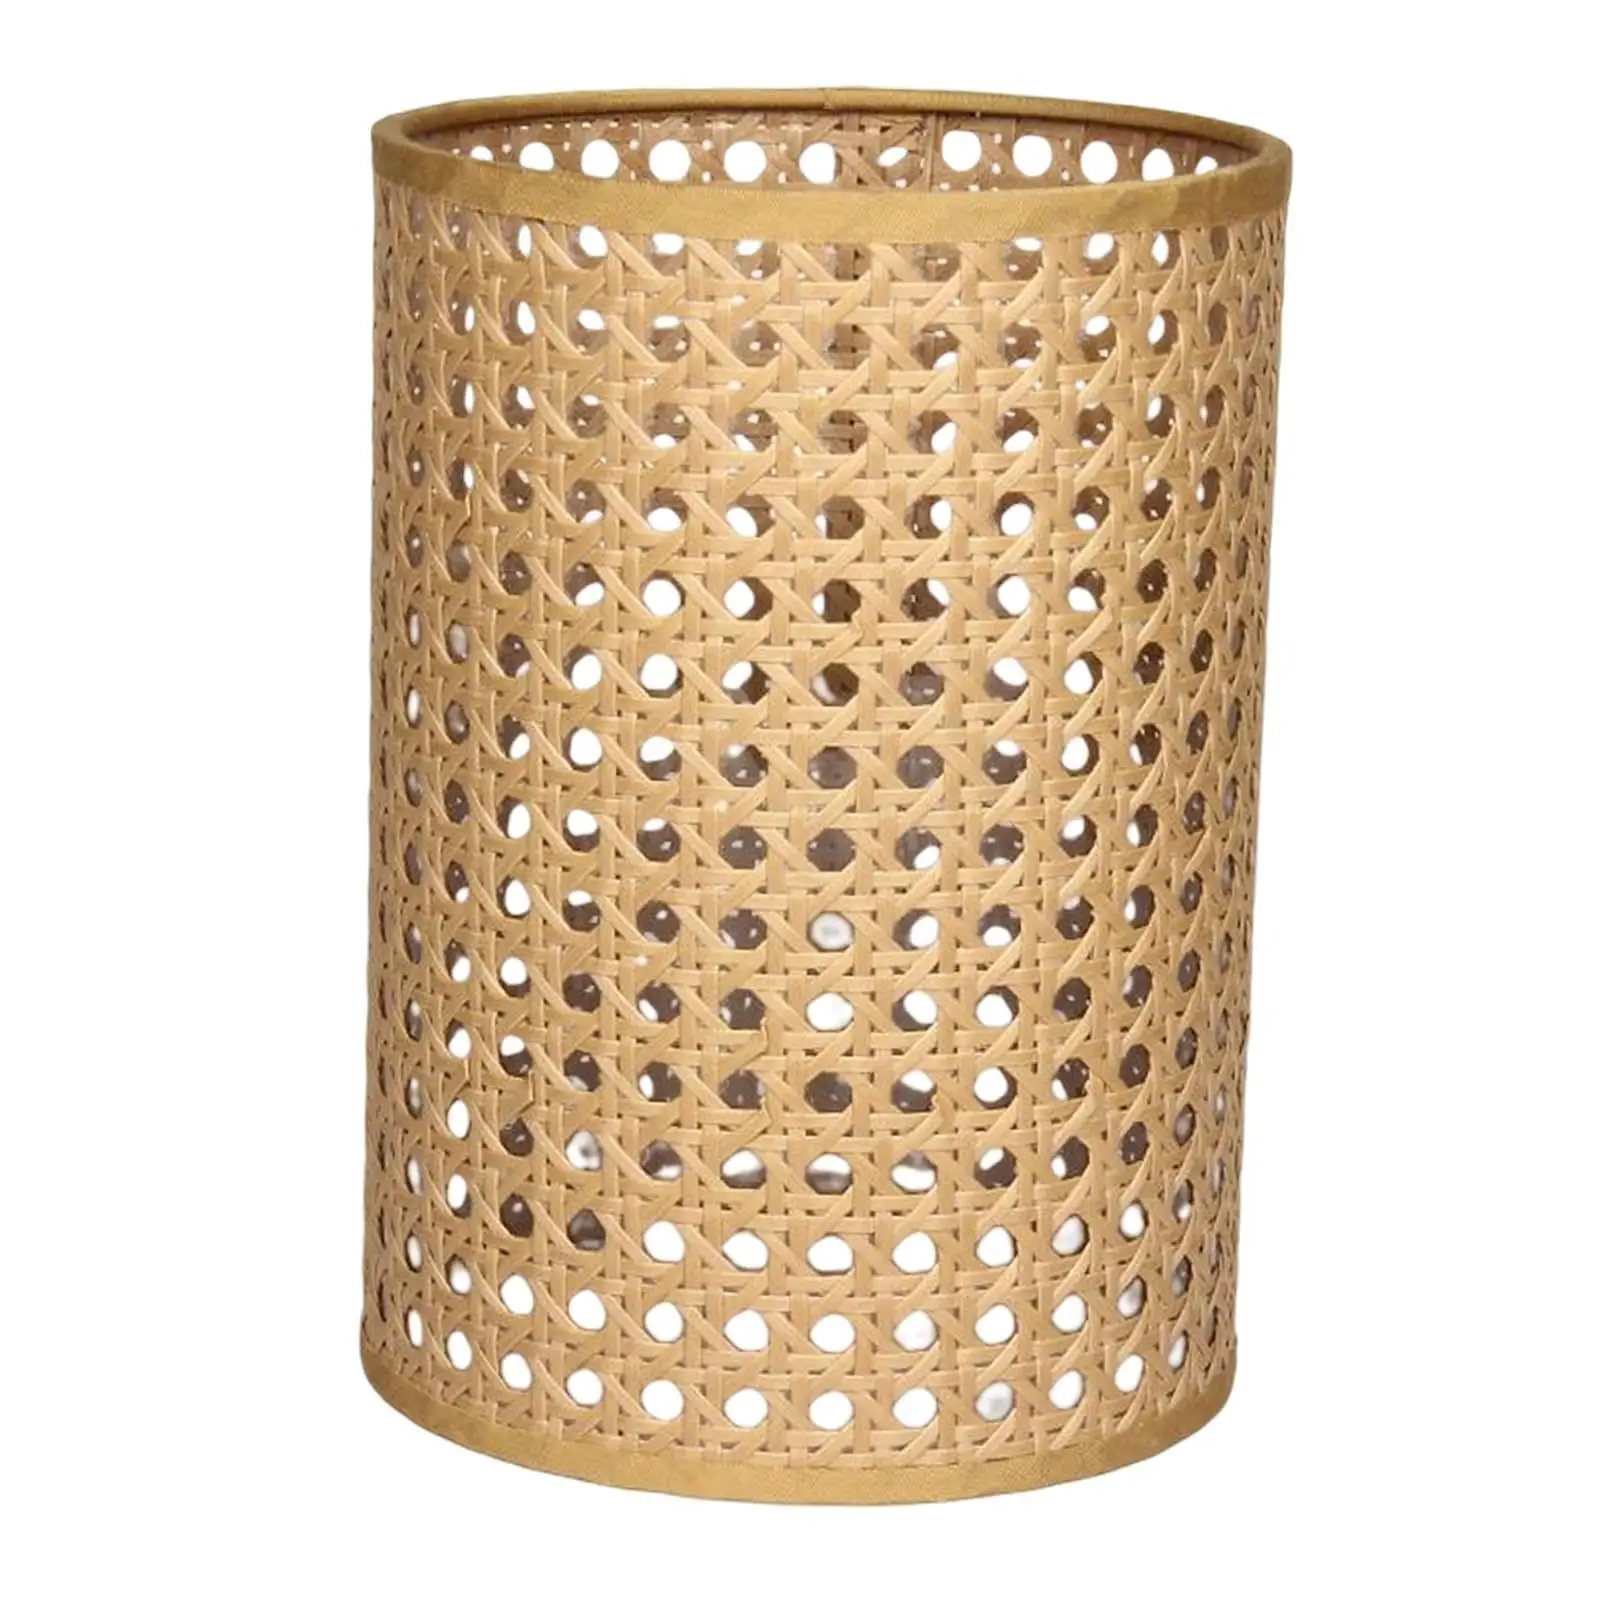 Classic Rattan Lamp Shade Ceiling Light Cover Chandelier Decorative Hanging Lampshade for Living Room Bedroom Home Dorm Decor